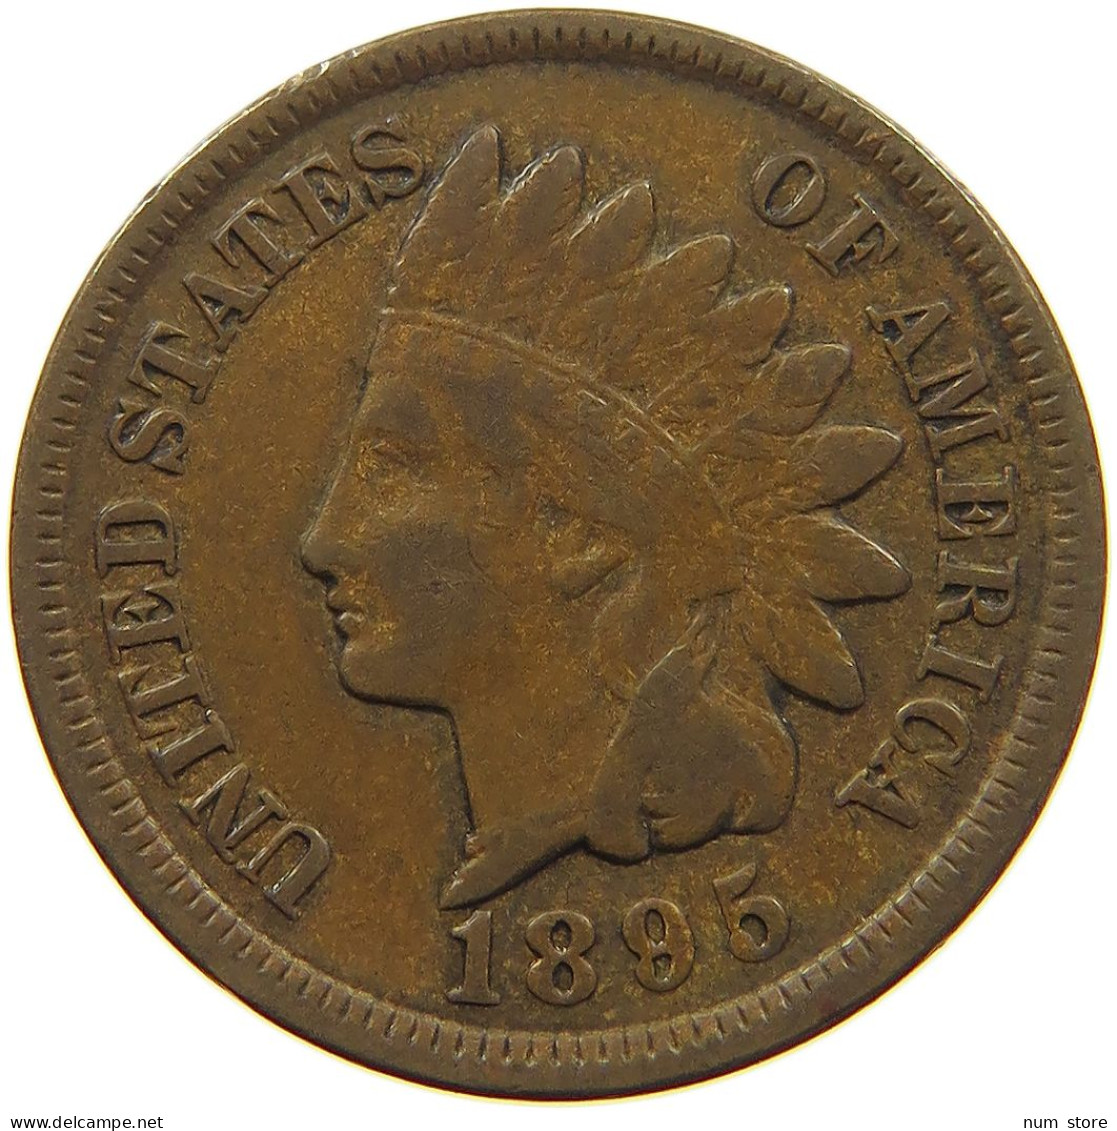 UNITED STATES OF AMERICA CENT 1895 INDIAN HEAD #c083 0667 - 1859-1909: Indian Head